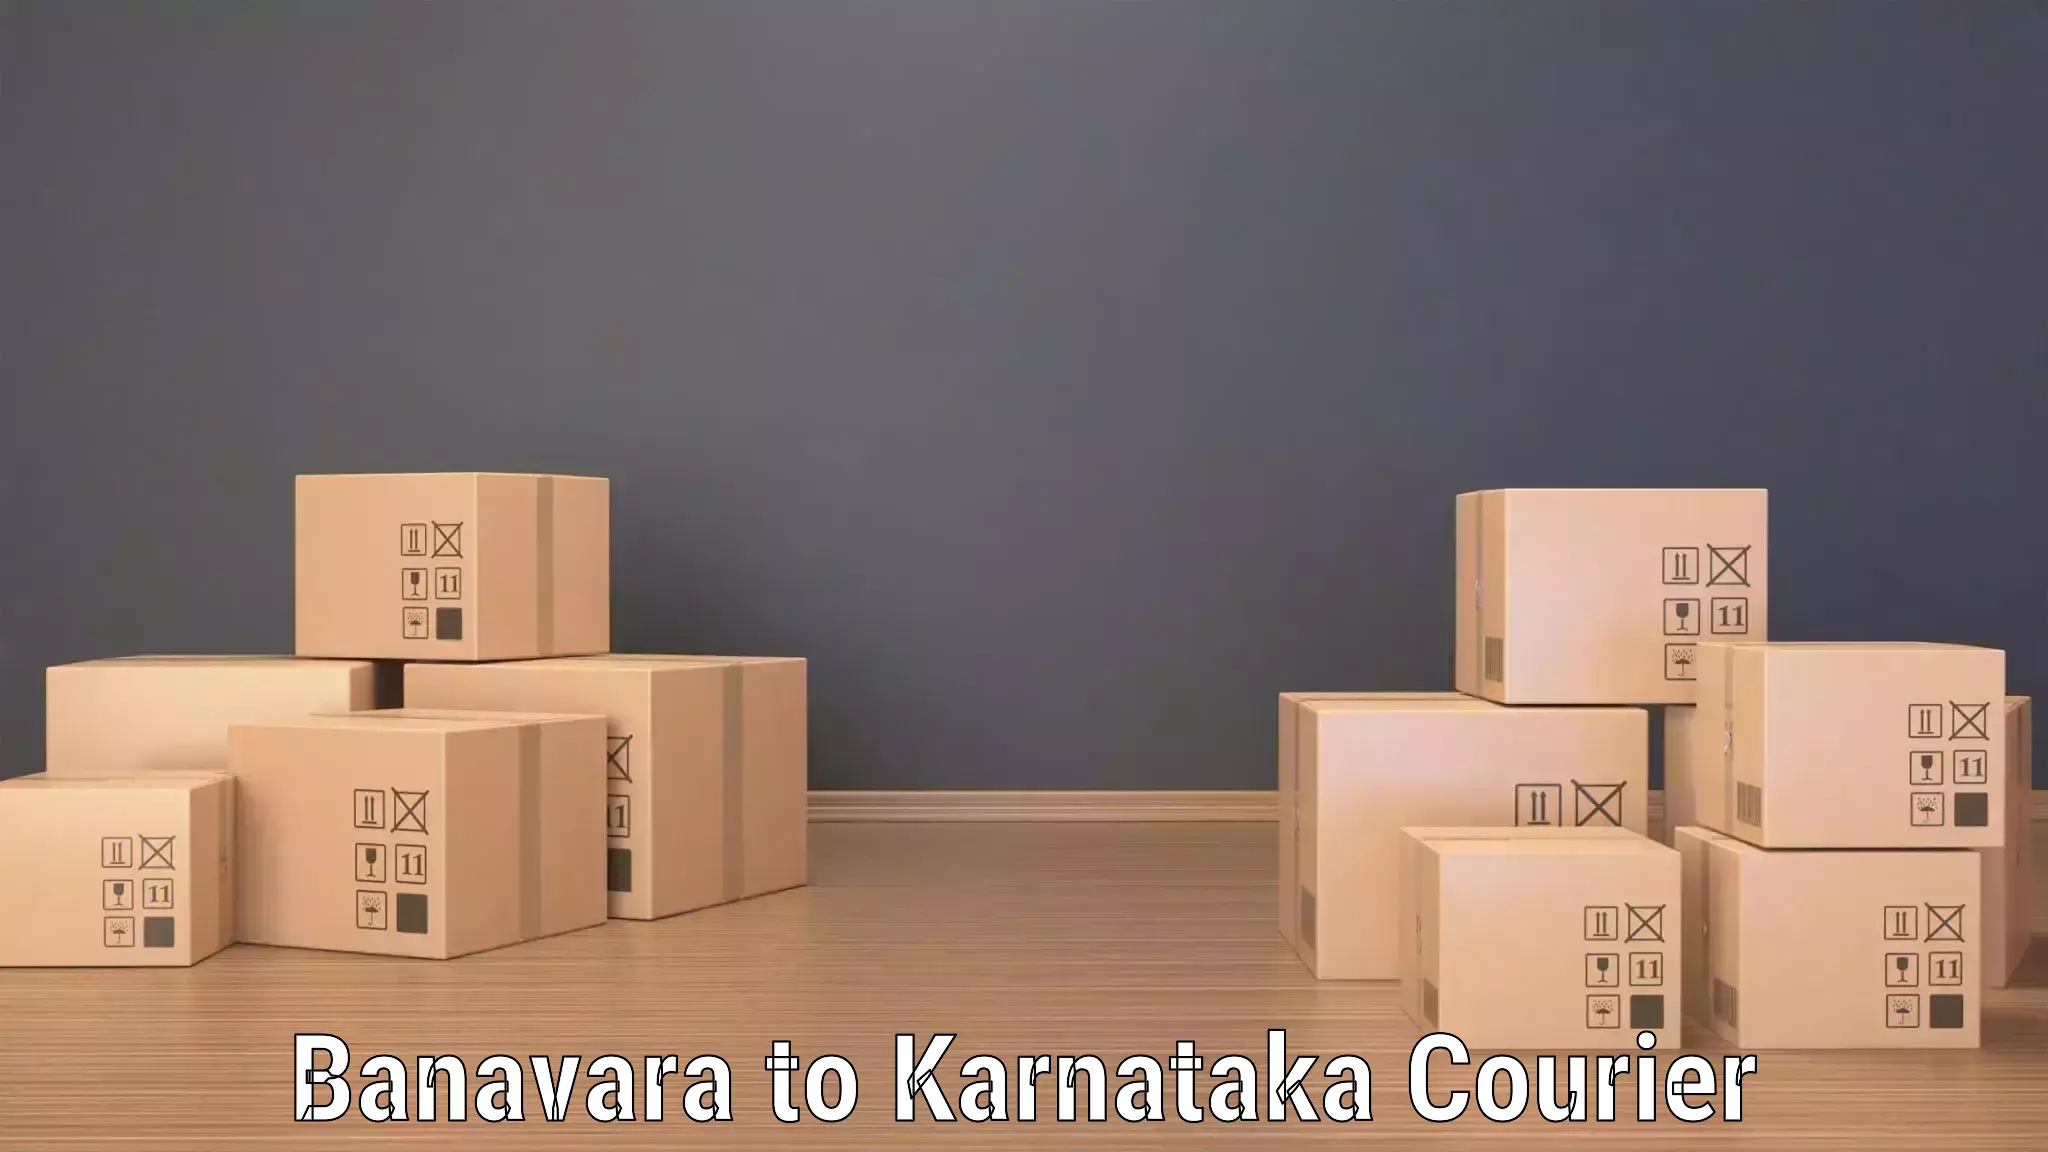 End-to-end delivery Banavara to Dharwad